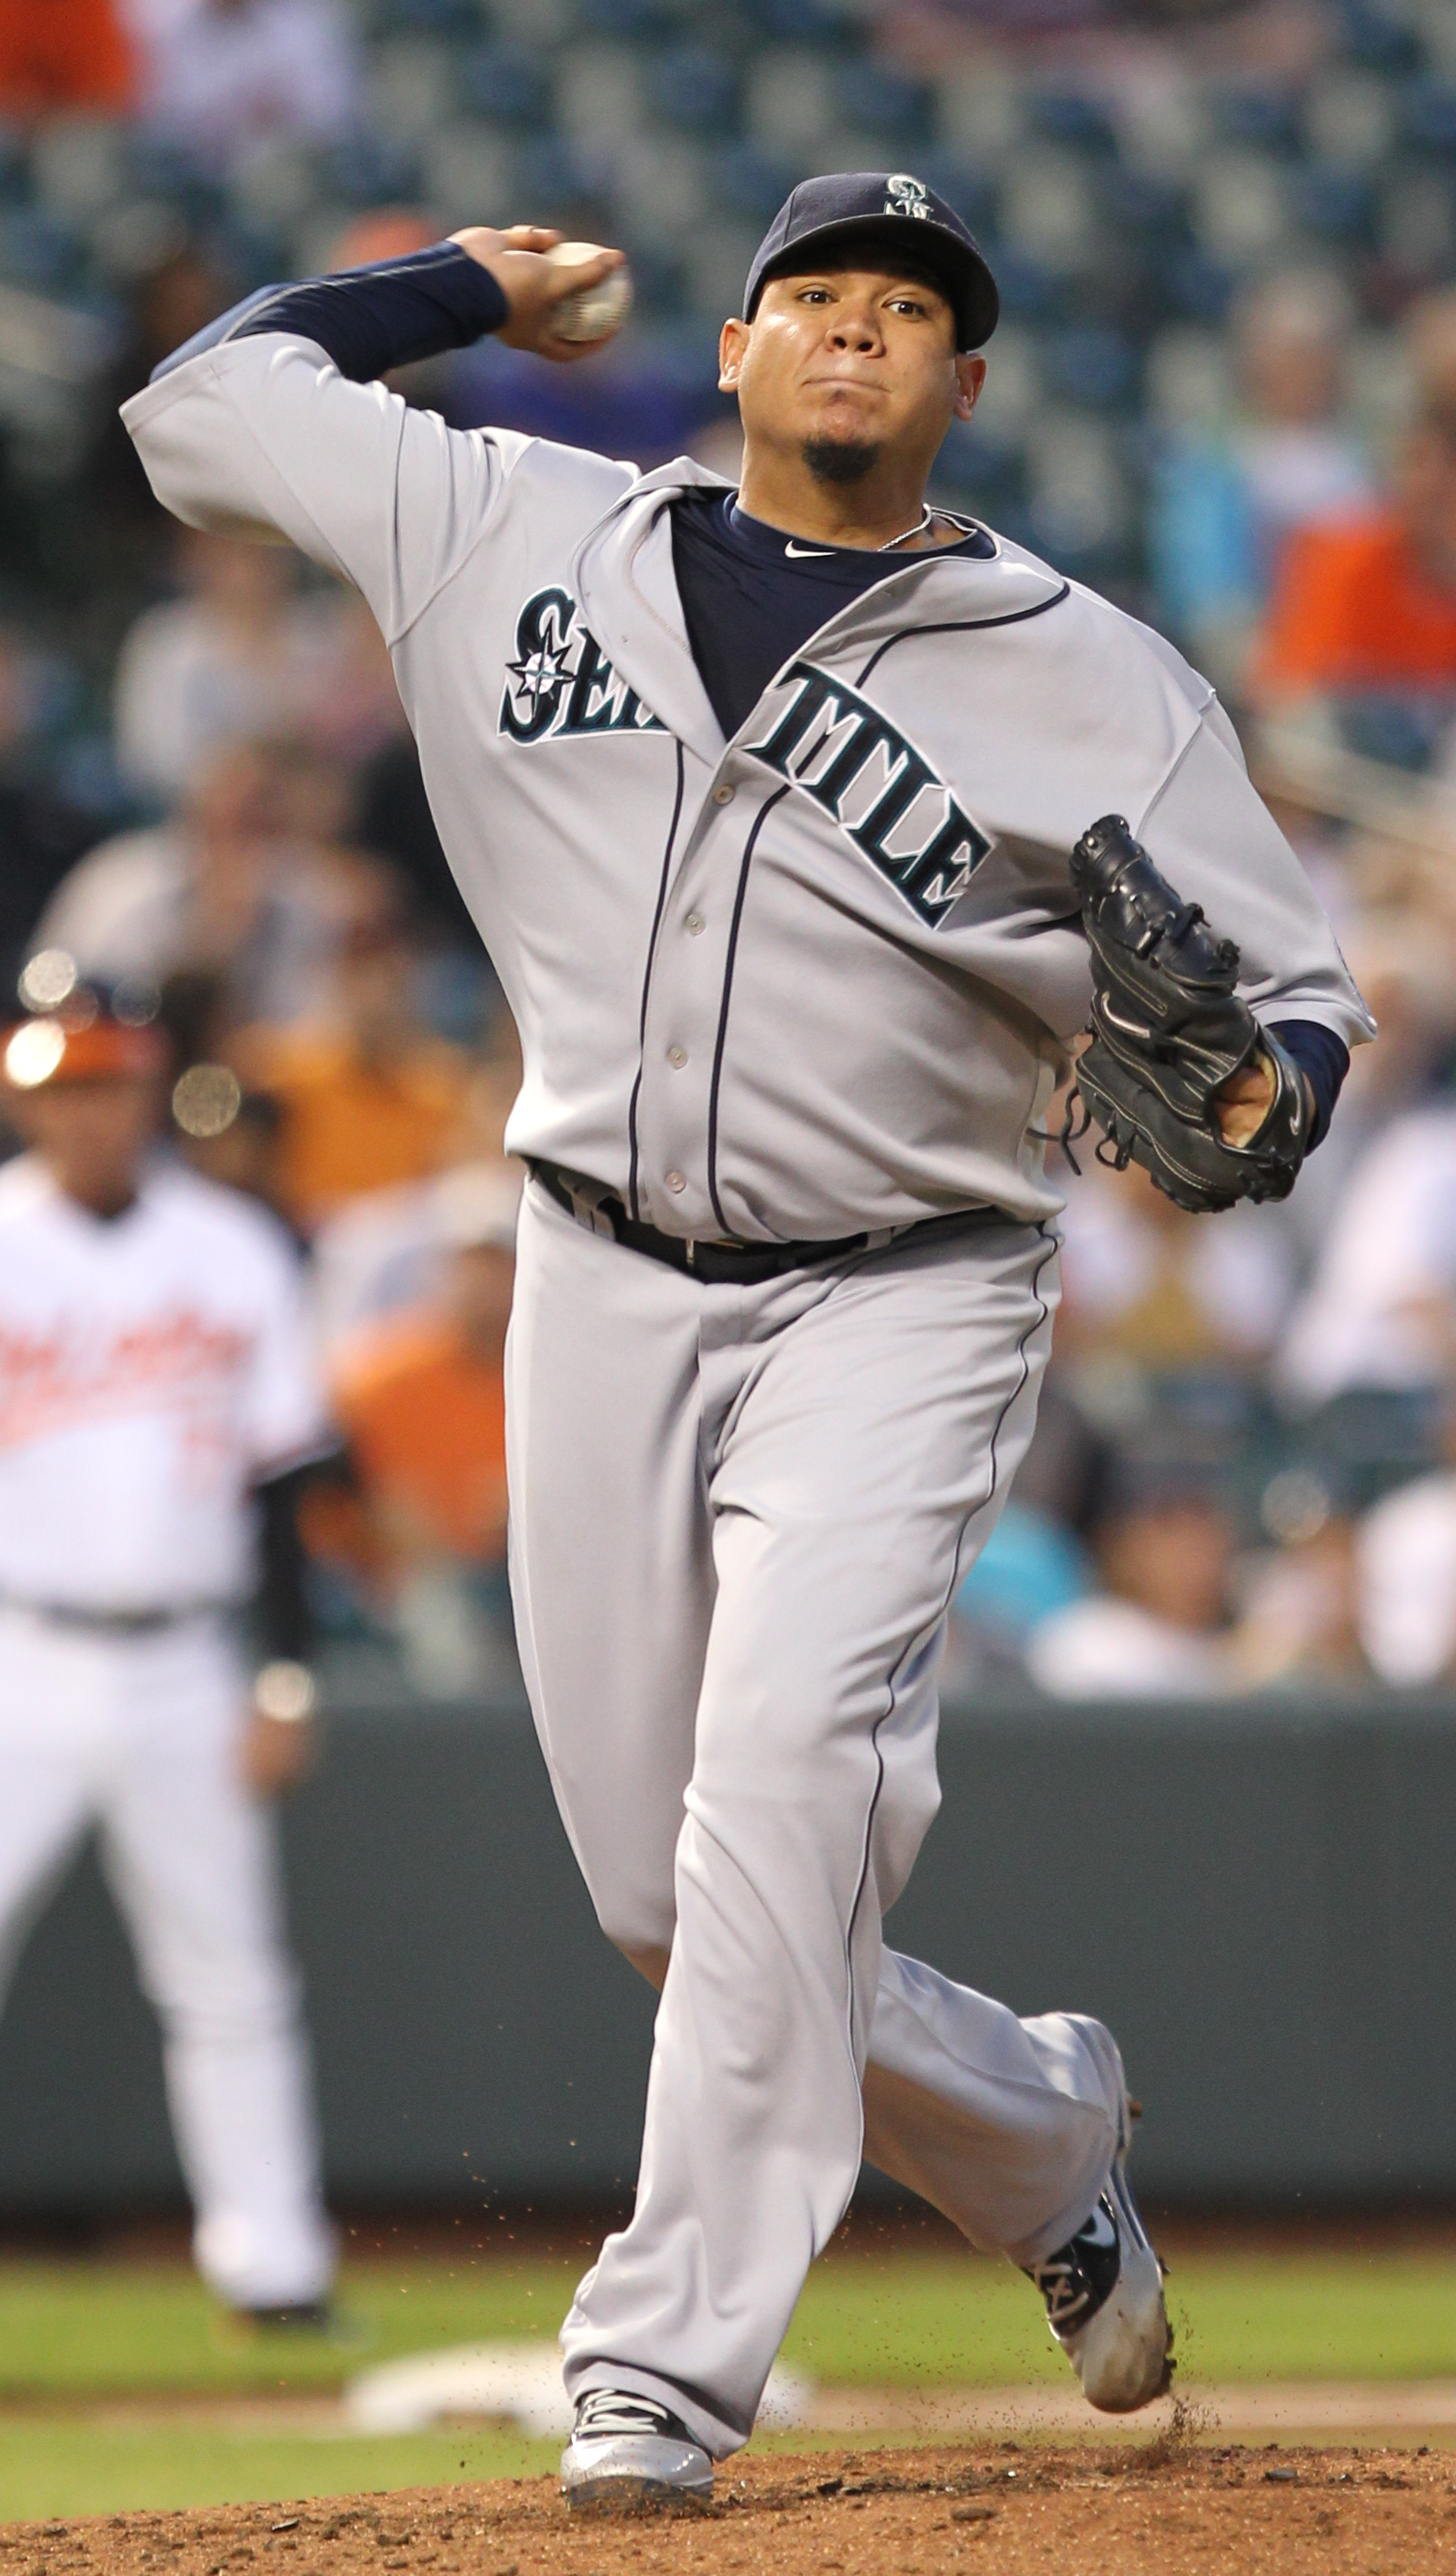 Seattle Mariners starting pitcher Felix Hernandez (34)  in action during the Seattle Mariners at Baltimore Orioles game on May 11,  2011.Photo by Keith Allison